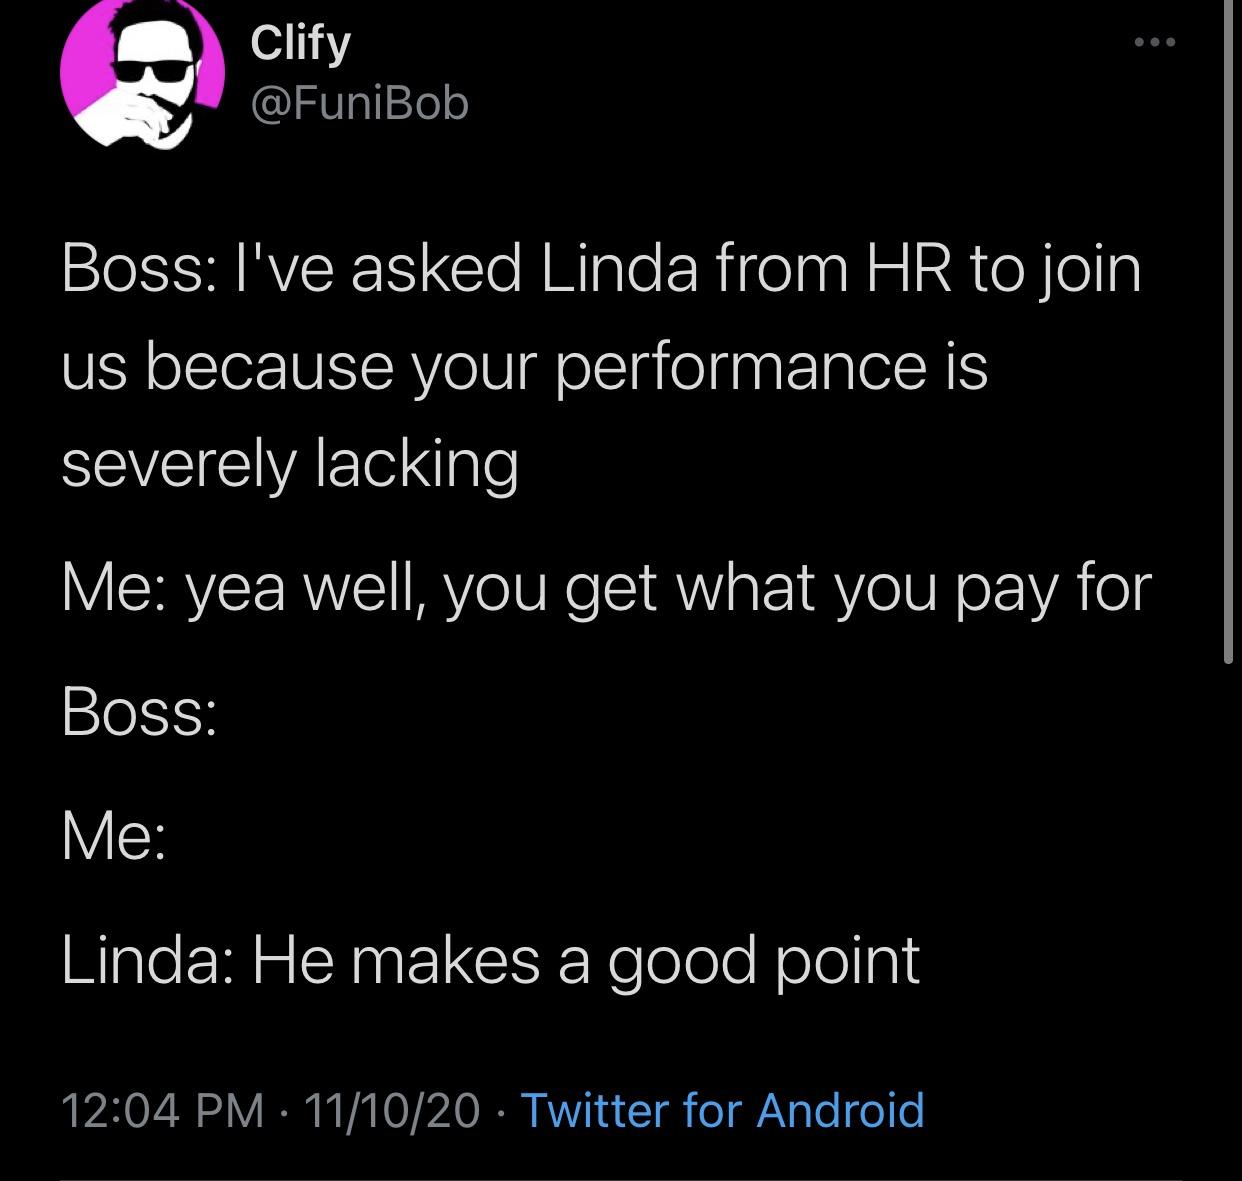 screenshot - Clify Boss I've asked Linda from Hr to join us because your performance is severely lacking Me yea well, you get what you pay for Boss Me Linda He makes a good point 111020 Twitter for Android